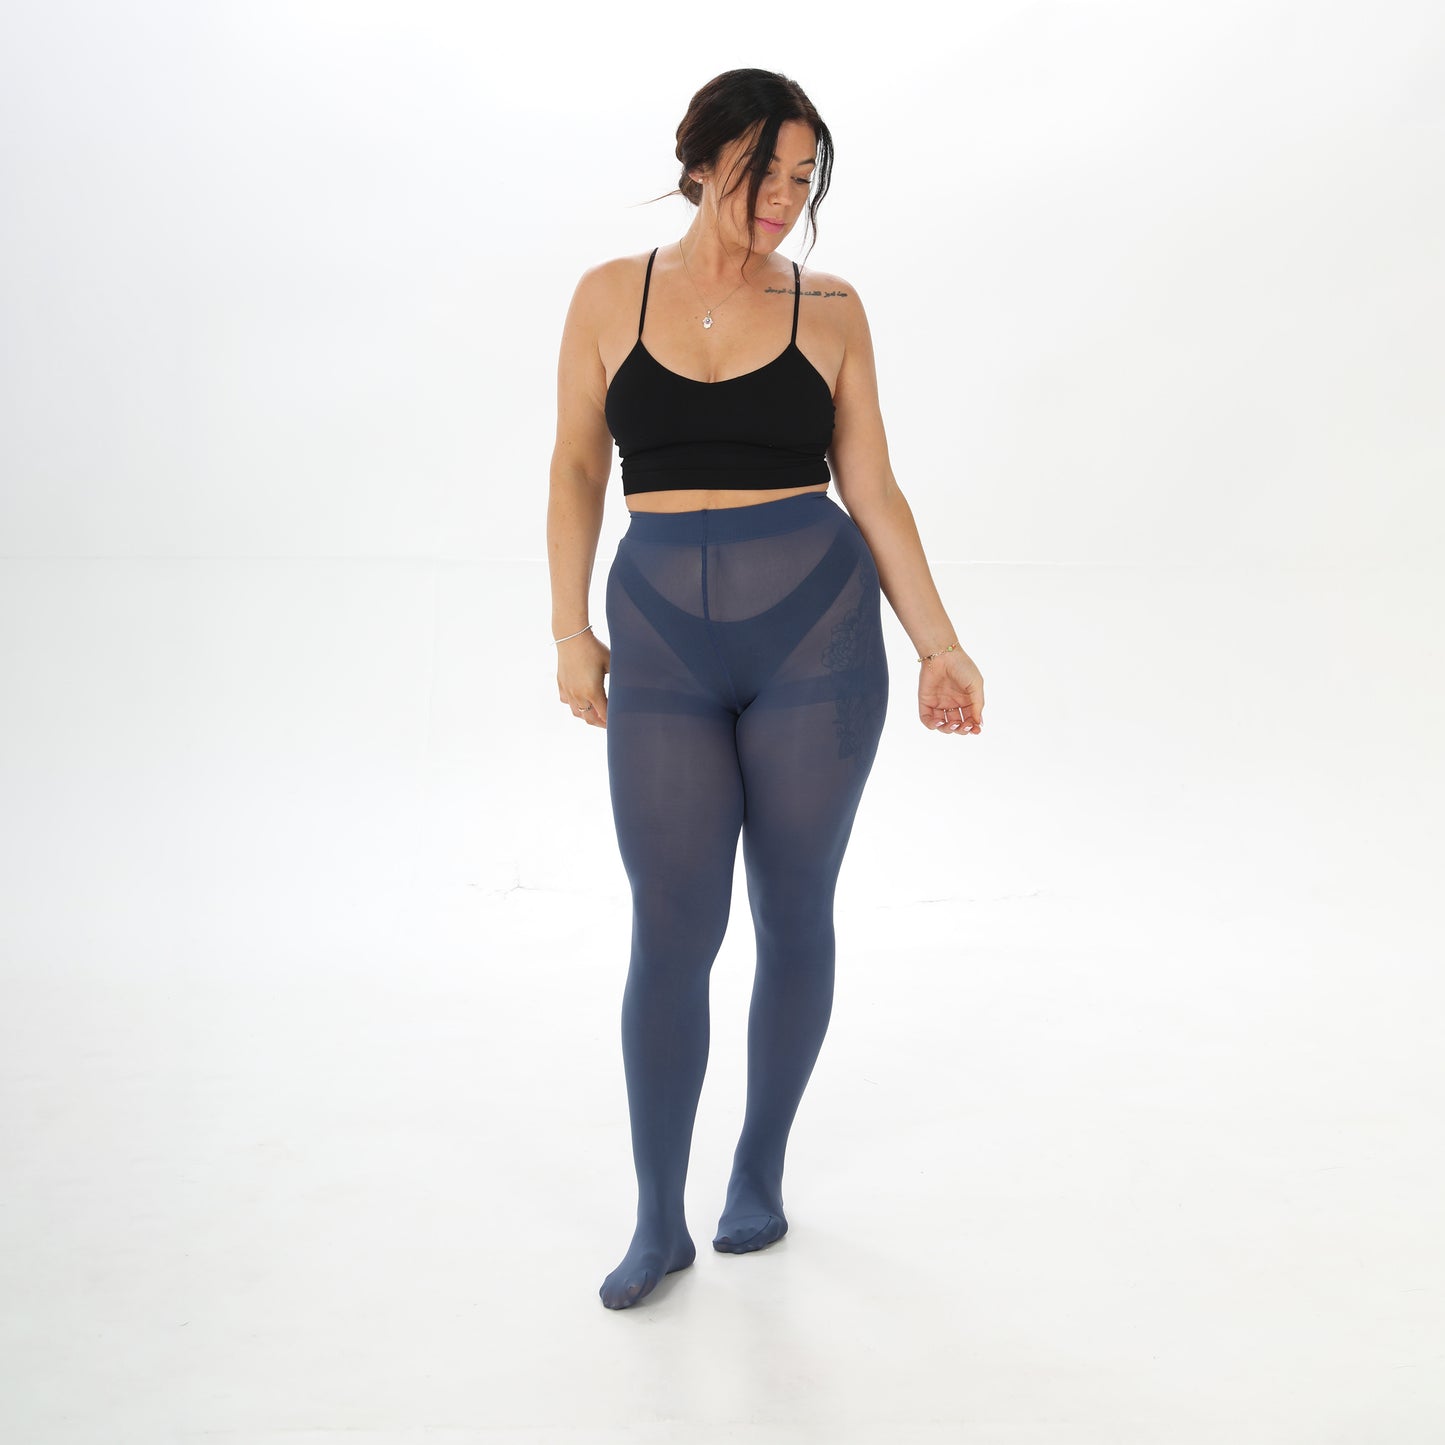 Womens Plus Size Opaque Tights 